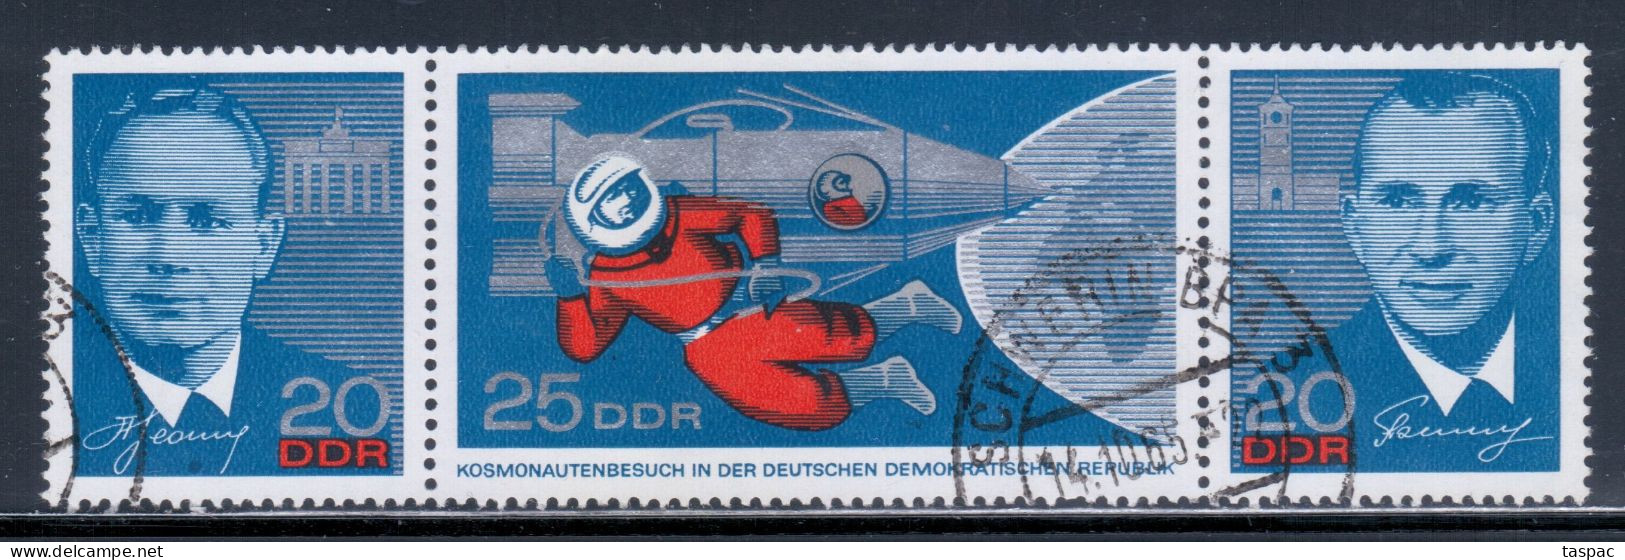 East Germany / DDR 1965 Mi# 1138-1140 Used - Strip Of 3 - Visit Of The Russian Cosmonauts / Space - Usados